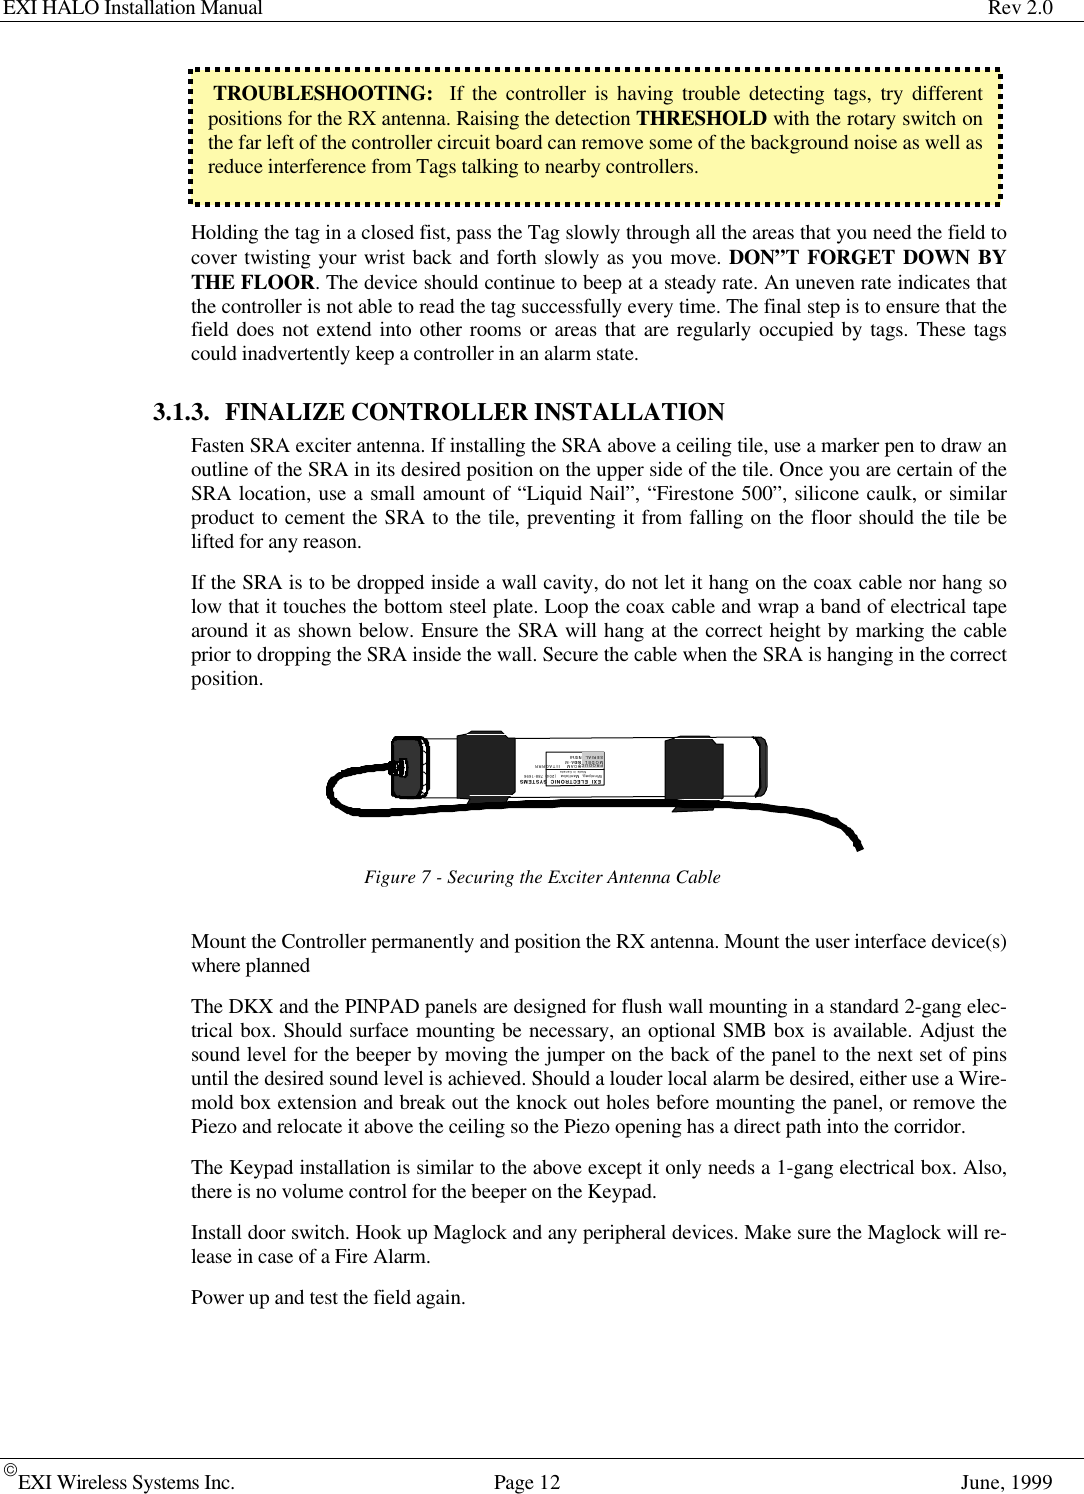 EXI HALO Installation Manual Rev 2.0EXI Wireless Systems Inc. Page 12 June, 1999 TROUBLESHOOTING:  If the controller is having trouble detecting tags, try differentpositions for the RX antenna. Raising the detection THRESHOLD with the rotary switch onthe far left of the controller circuit board can remove some of the background noise as well asreduce interference from Tags talking to nearby controllers.Holding the tag in a closed fist, pass the Tag slowly through all the areas that you need the field tocover twisting your wrist back and forth slowly as you move. DON”T FORGET DOWN BYTHE FLOOR. The device should continue to beep at a steady rate. An uneven rate indicates thatthe controller is not able to read the tag successfully every time. The final step is to ensure that thefield does not extend into other rooms or areas that are regularly occupied by tags. These tagscould inadvertently keep a controller in an alarm state. 3.1.3. FINALIZE CONTROLLER INSTALLATIONFasten SRA exciter antenna. If installing the SRA above a ceiling tile, use a marker pen to draw anoutline of the SRA in its desired position on the upper side of the tile. Once you are certain of theSRA location, use a small amount of “Liquid Nail”, “Firestone 500”, silicone caulk, or similarproduct to cement the SRA to the tile, preventing it from falling on the floor should the tile belifted for any reason.If the SRA is to be dropped inside a wall cavity, do not let it hang on the coax cable nor hang solow that it touches the bottom steel plate. Loop the coax cable and wrap a band of electrical tapearound it as shown below. Ensure the SRA will hang at the correct height by marking the cableprior to dropping the SRA inside the wall. Secure the cable when the SRA is hanging in the correctposition.Figure 7 - Securing the Exciter Antenna CableMount the Controller permanently and position the RX antenna. Mount the user interface device(s)where plannedThe DKX and the PINPAD panels are designed for flush wall mounting in a standard 2-gang elec-trical box. Should surface mounting be necessary, an optional SMB box is available. Adjust thesound level for the beeper by moving the jumper on the back of the panel to the next set of pinsuntil the desired sound level is achieved. Should a louder local alarm be desired, either use a Wire-mold box extension and break out the knock out holes before mounting the panel, or remove thePiezo and relocate it above the ceiling so the Piezo opening has a direct path into the corridor.The Keypad installation is similar to the above except it only needs a 1-gang electrical box. Also,there is no volume control for the beeper on the Keypad.Install door switch. Hook up Maglock and any peripheral devices. Make sure the Maglock will re-lease in case of a Fire Alarm.Power up and test the field again.EXI ELECTRONIC SYSTEMSWinnipeg, Manitoba  (204) 788-1696Made in CanadaPRODUCTMODEL NO.SERIAL NO&gt;ROAM  II/TAGRRRSEA-M1118